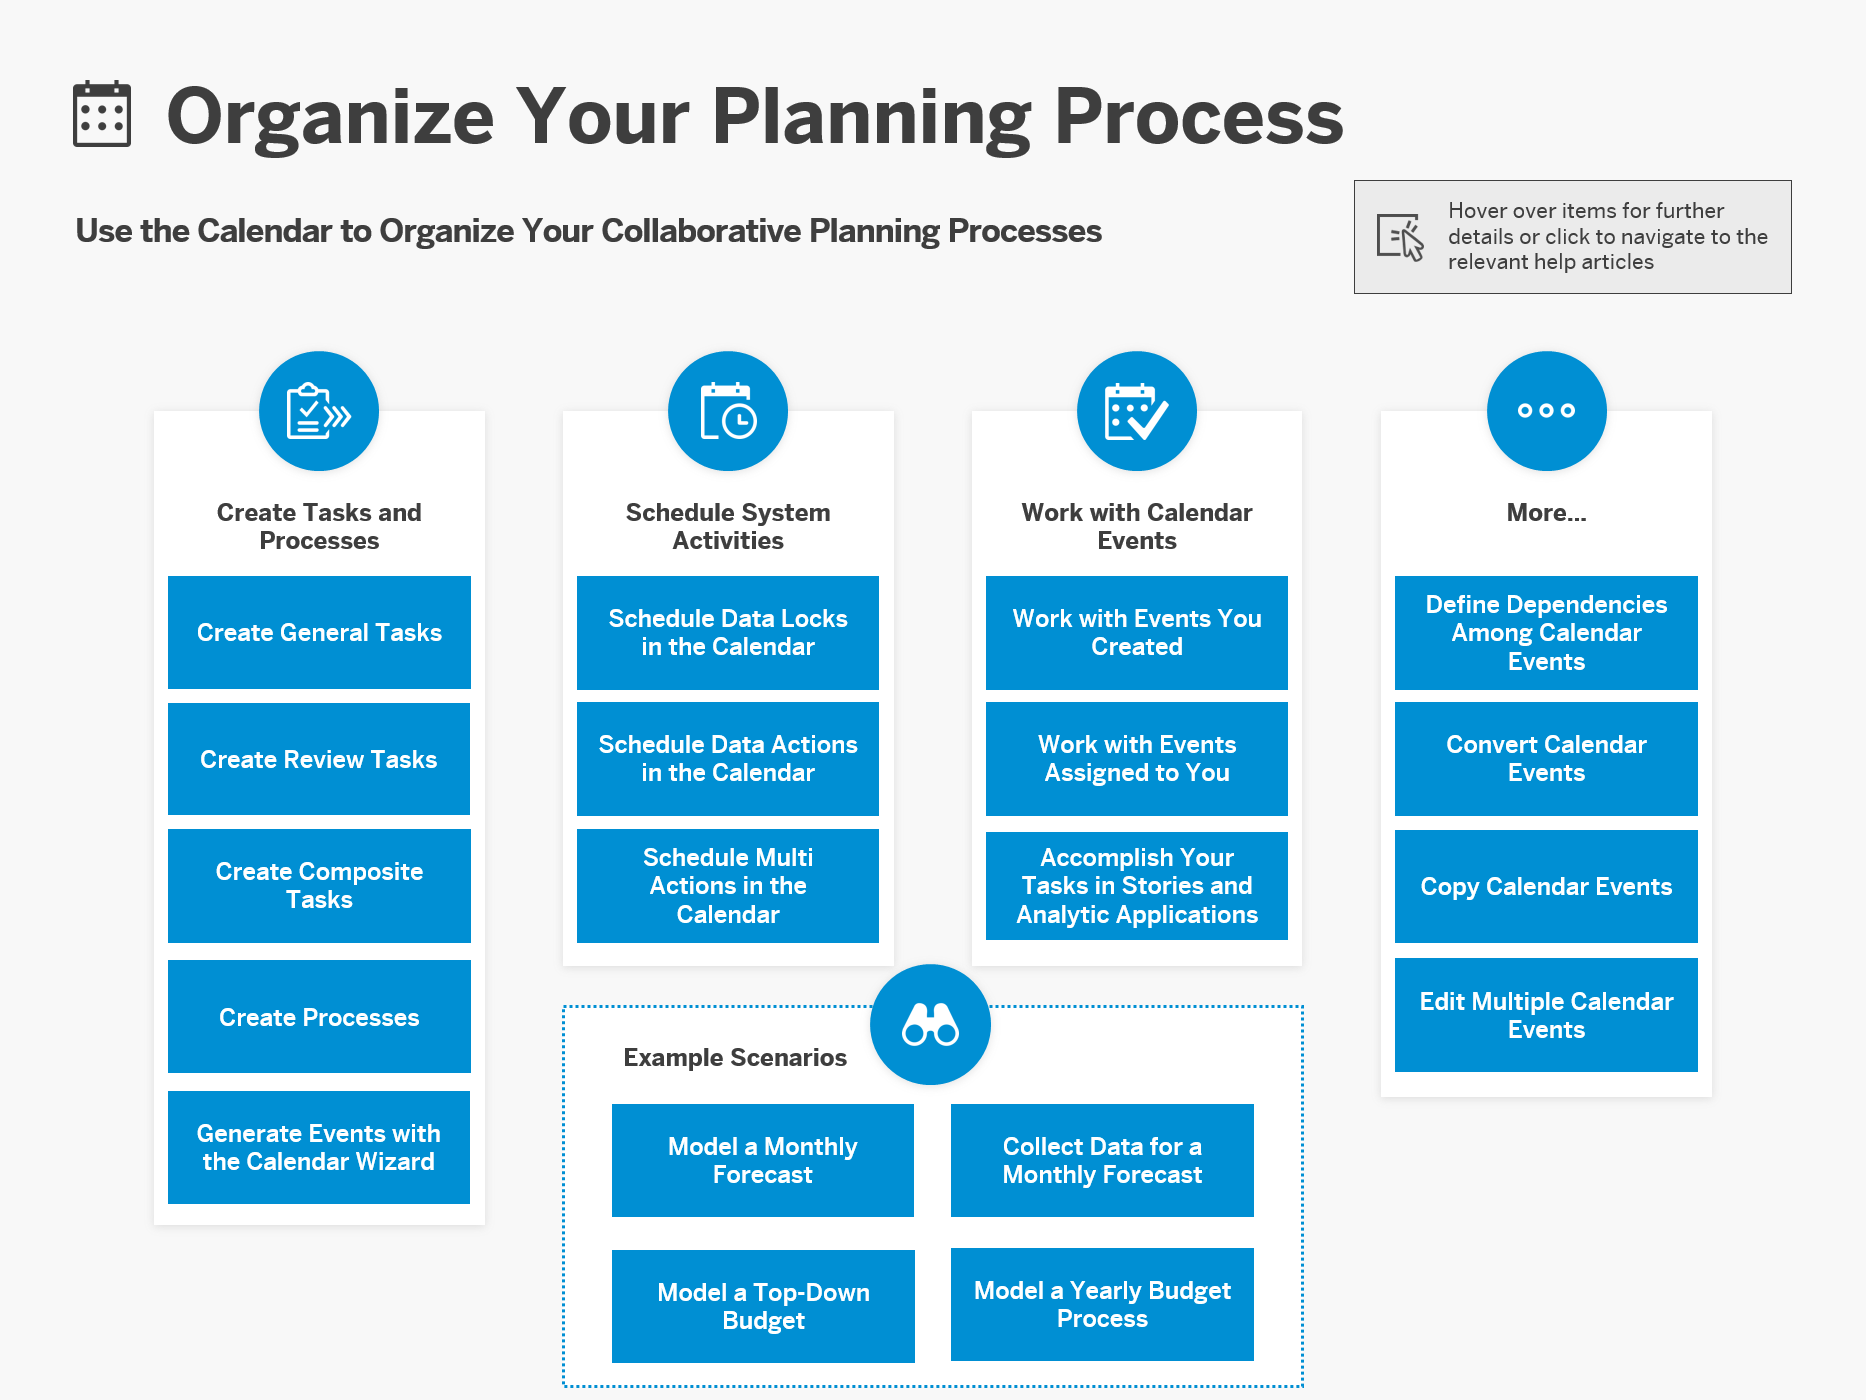 This is an interactive image map showing an overview of the help
							articles you might need to understand how you can organize your planning
							processes with the SAP Analytics Cloud
							calendar.